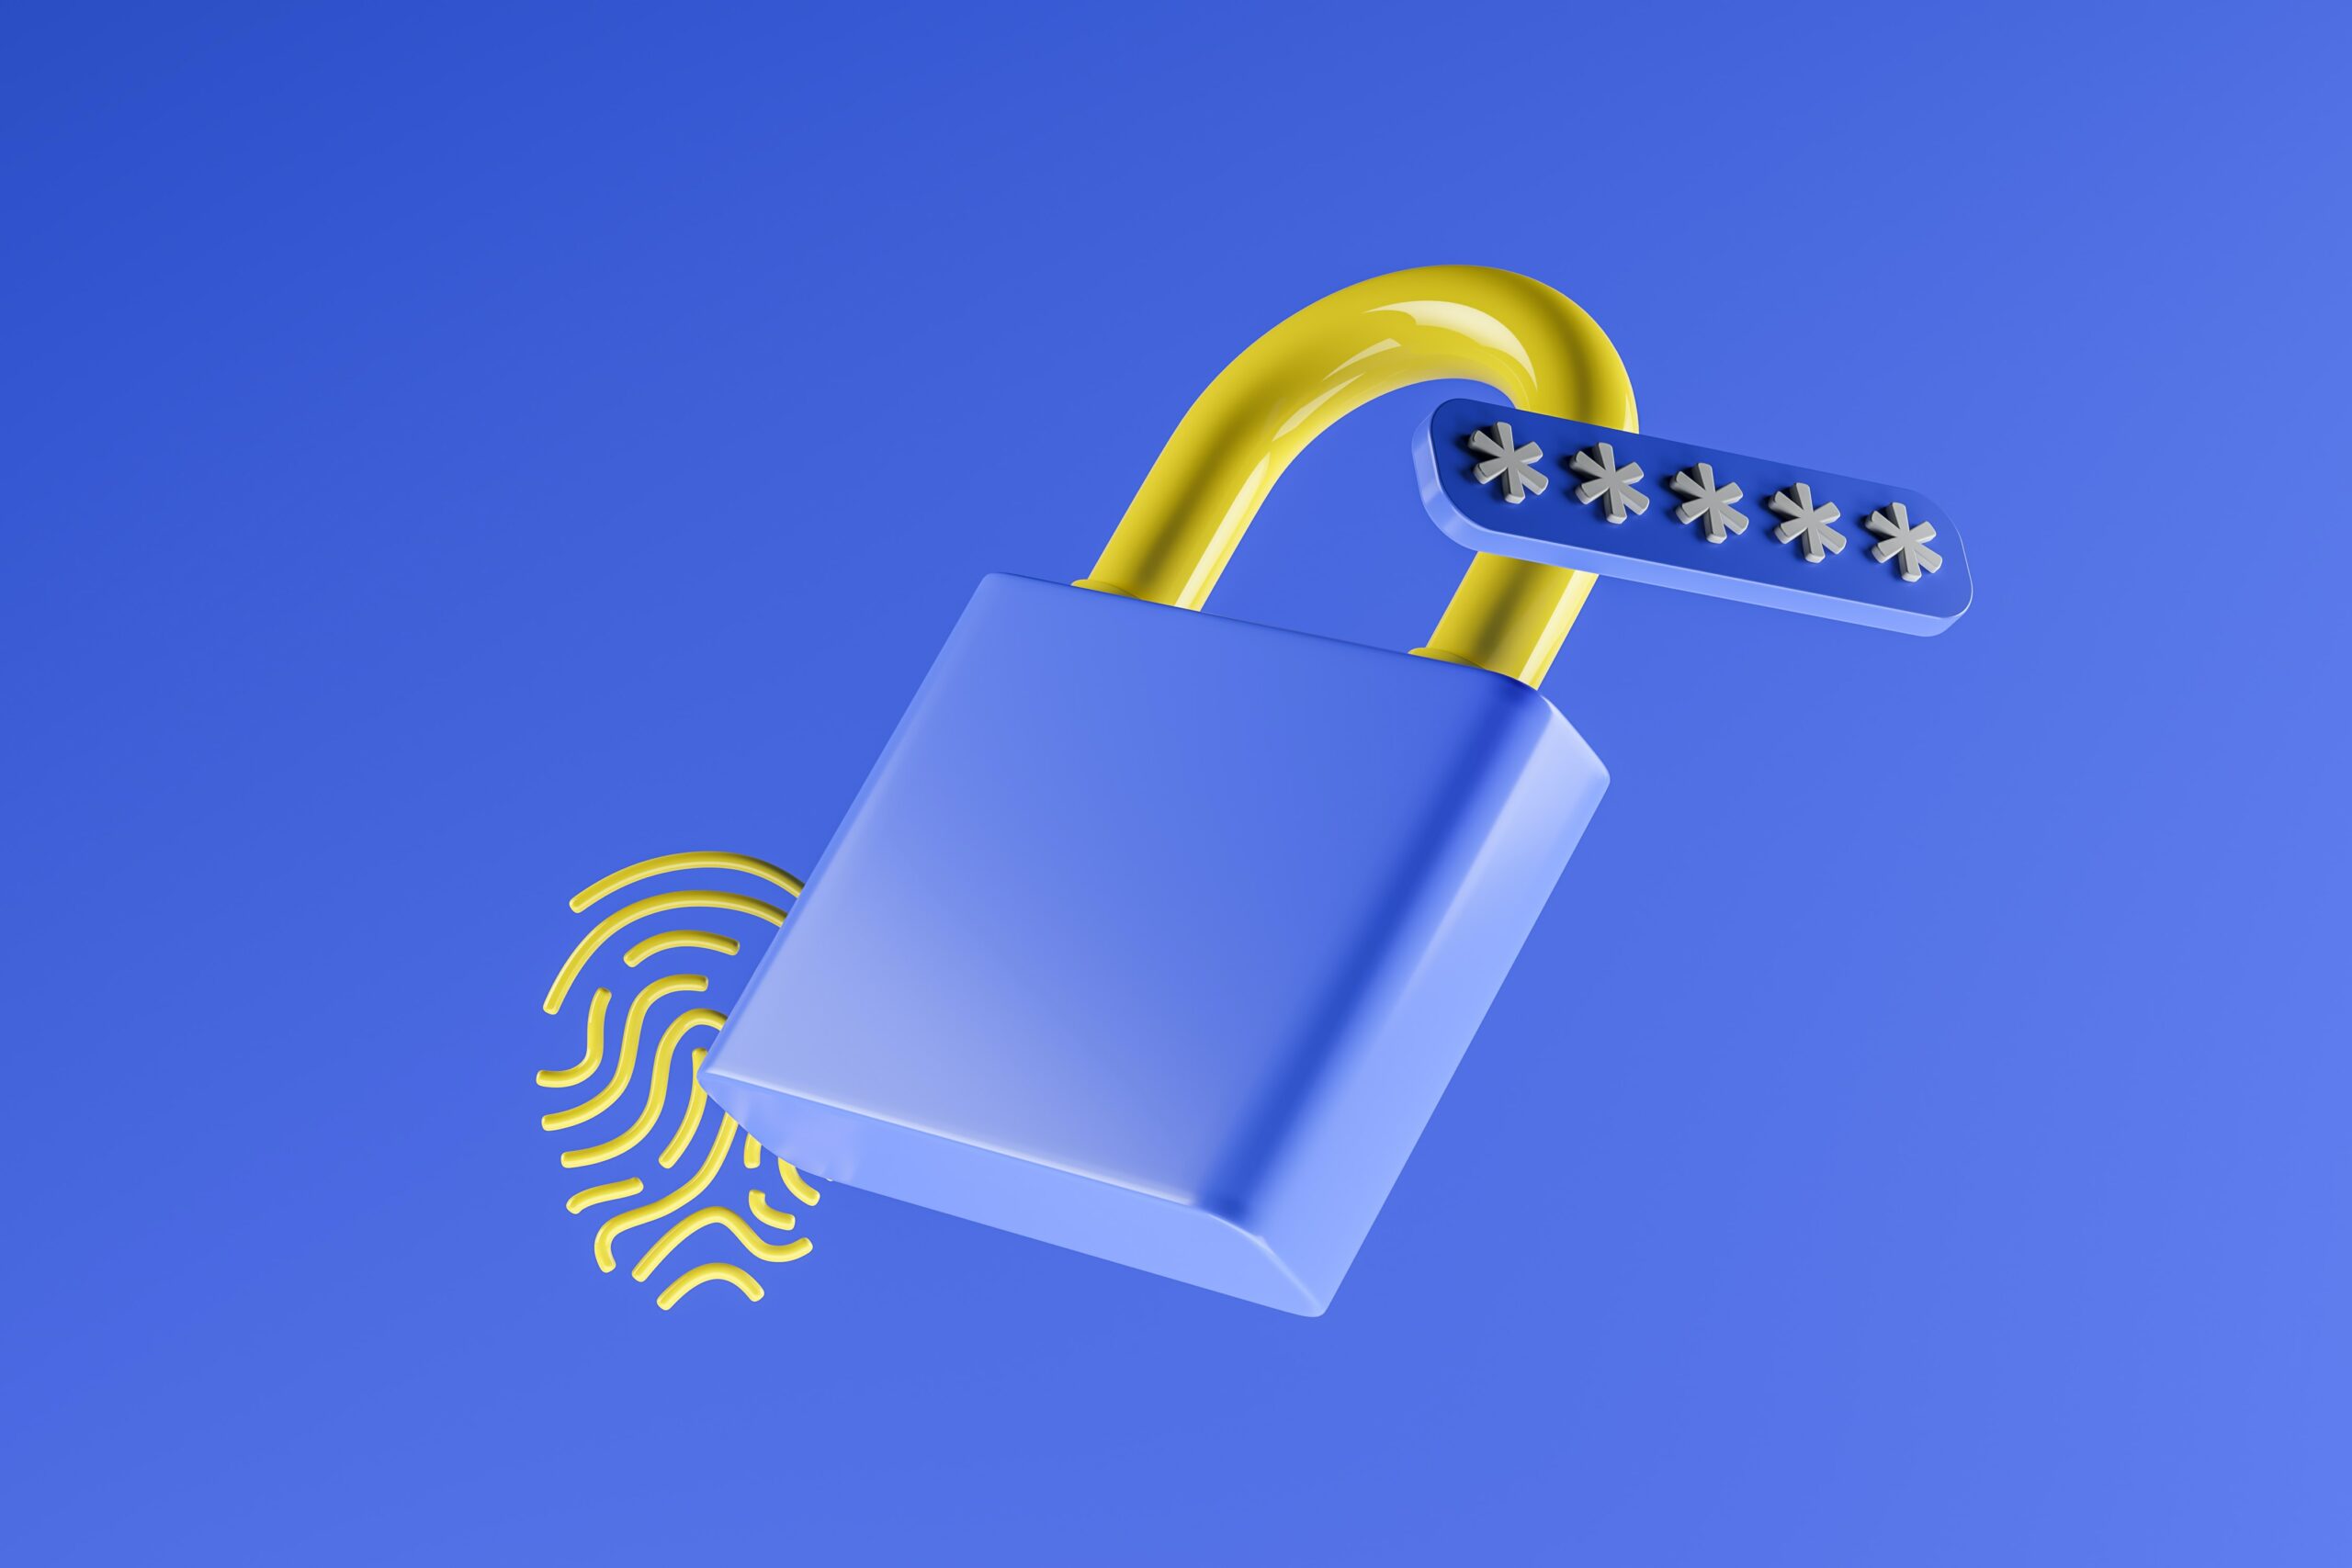 A padlock with a fingerprint on it on a blue background, symbolizing secure access control with strong passwords.